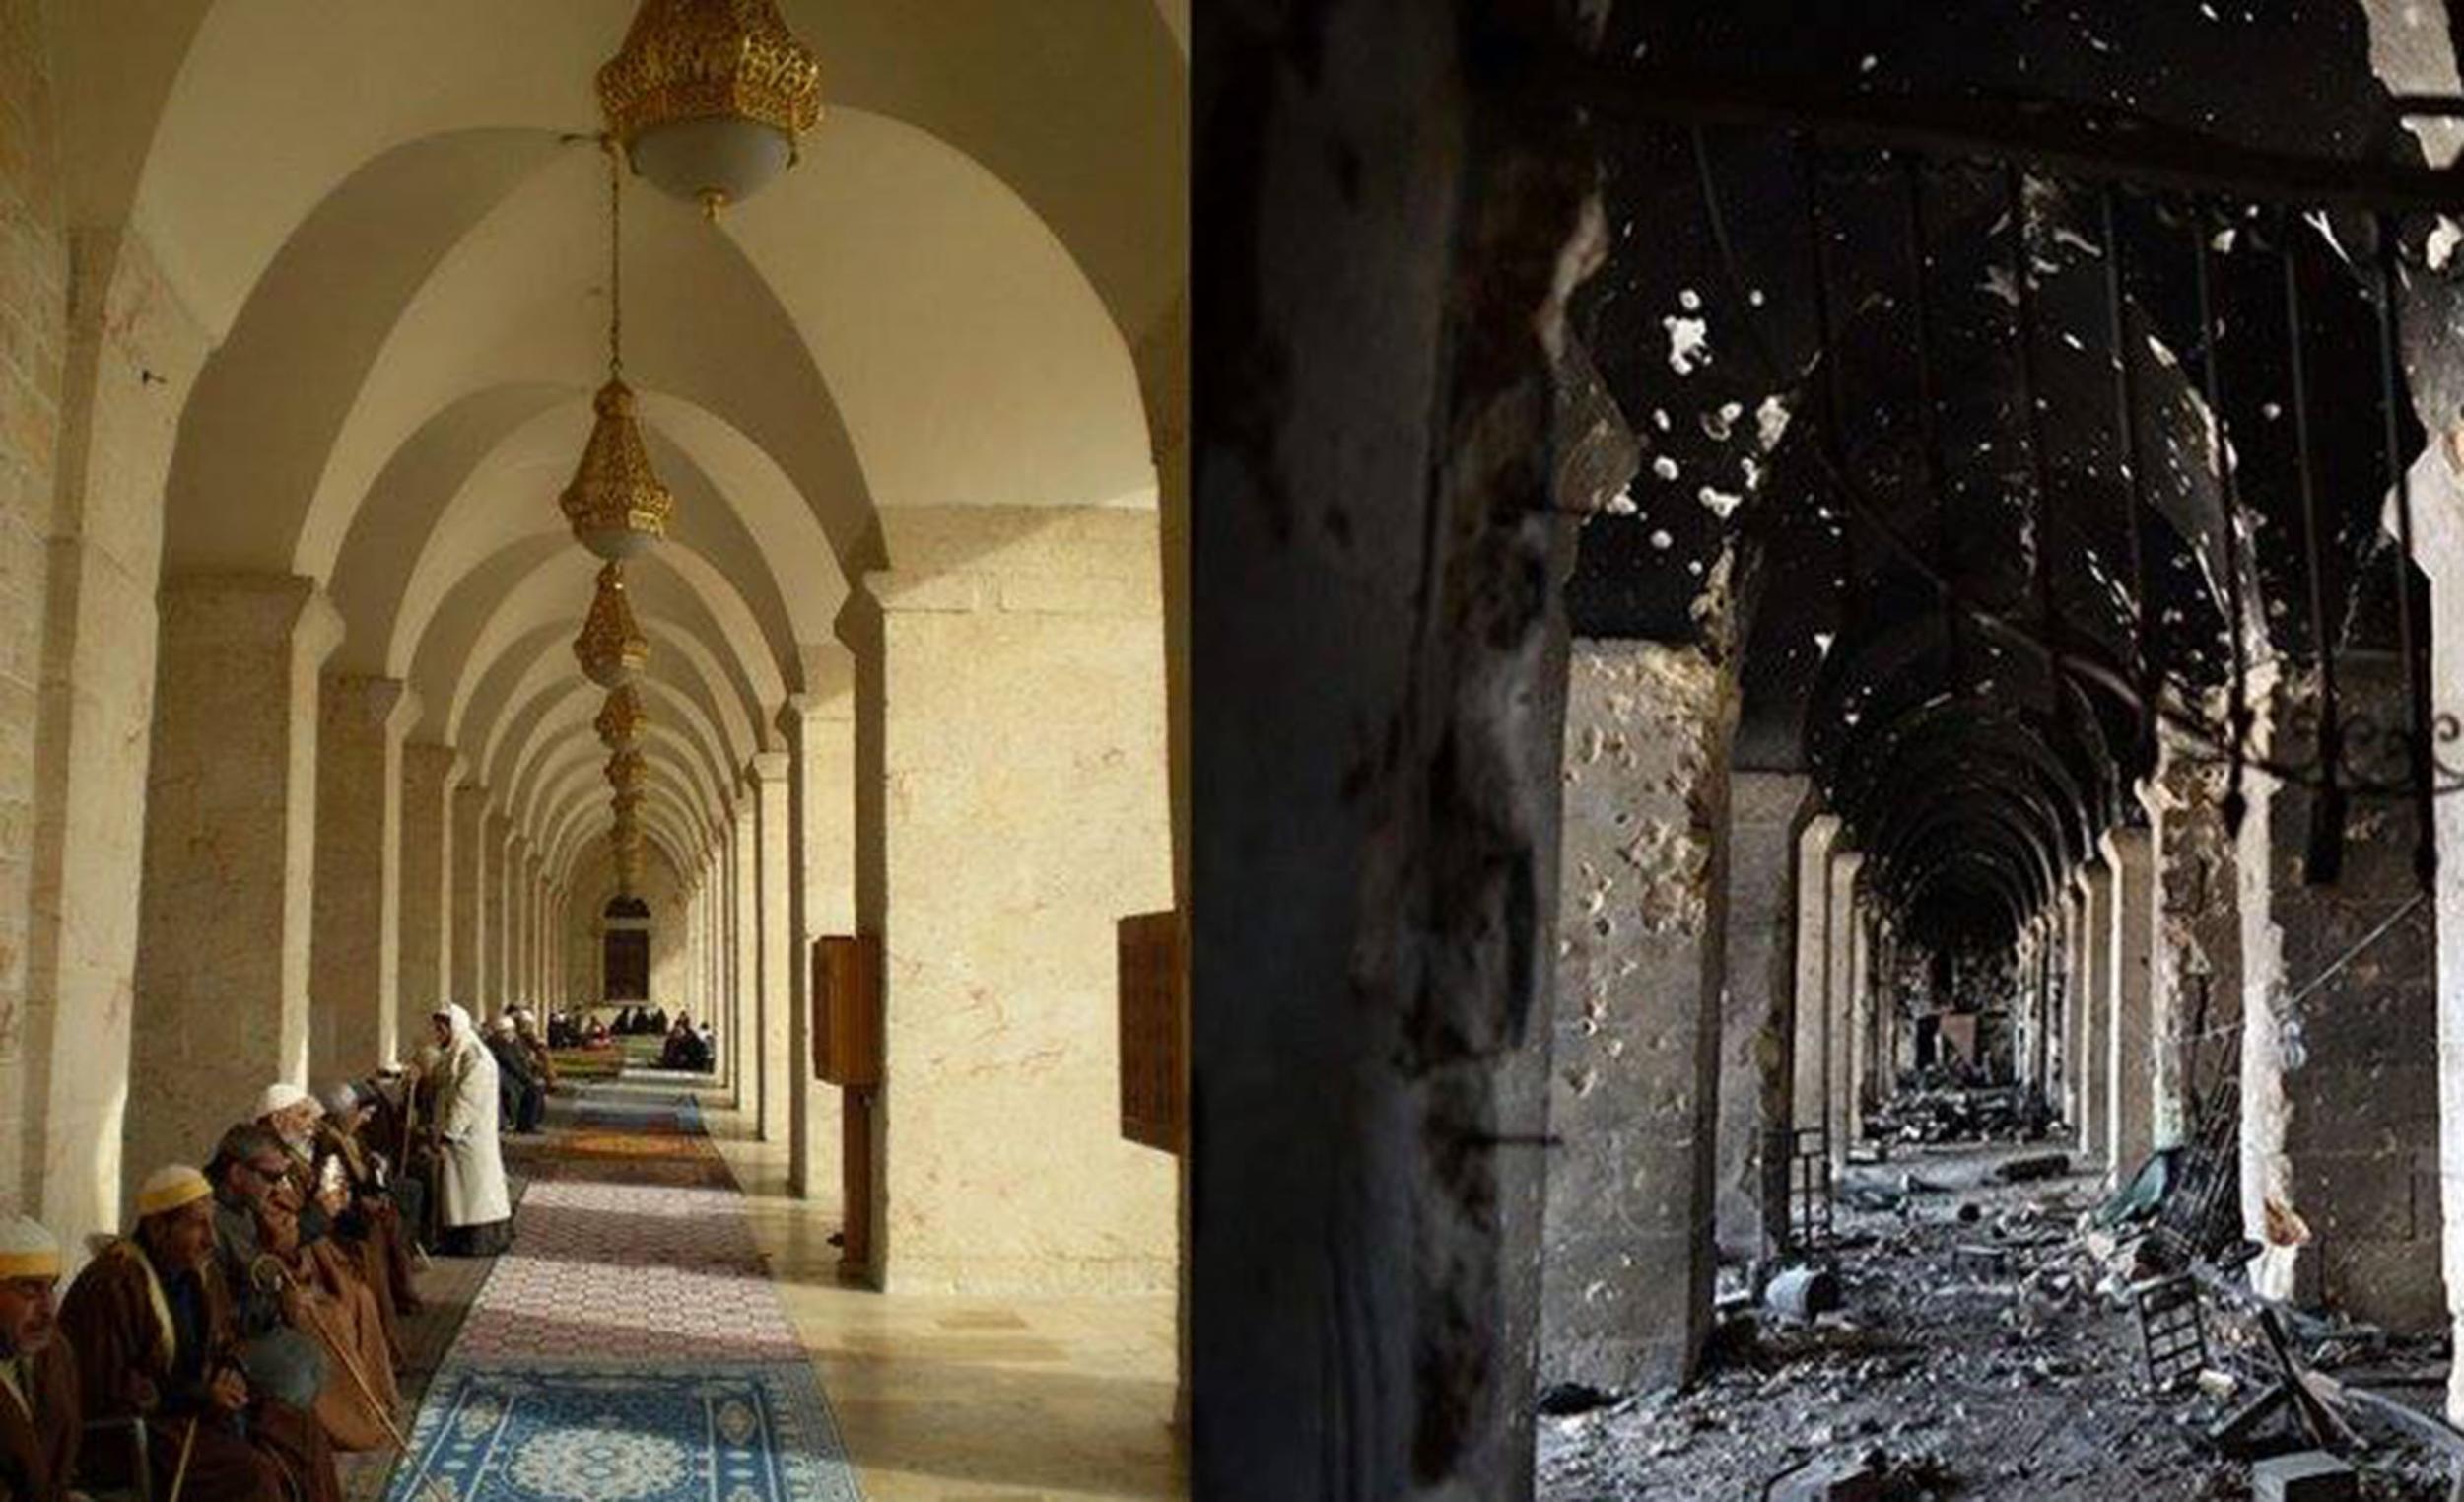 The ancient mosque before and after Syria’s civil war 